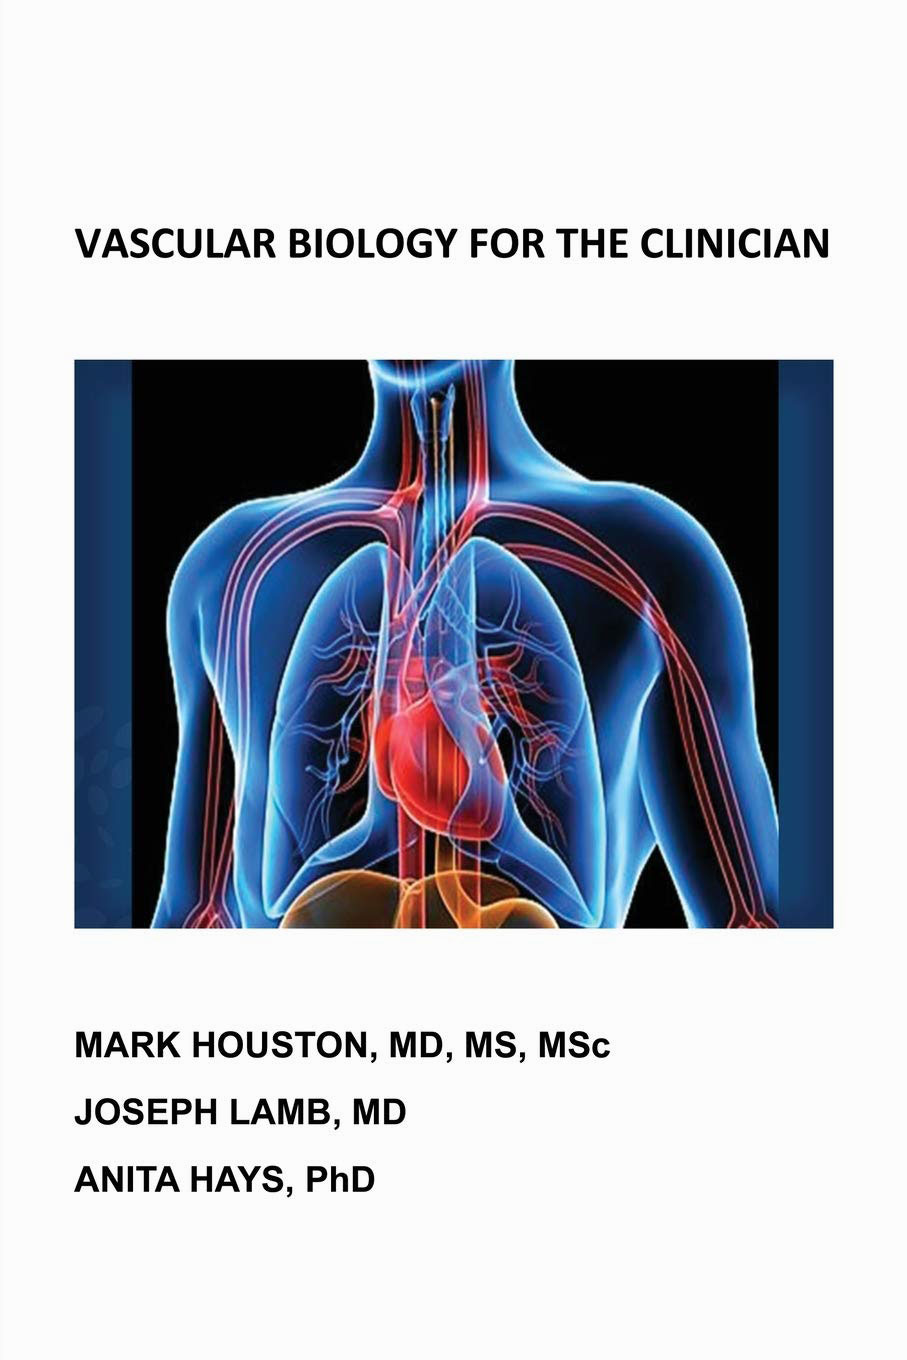 Vascular Biology for the Clinician